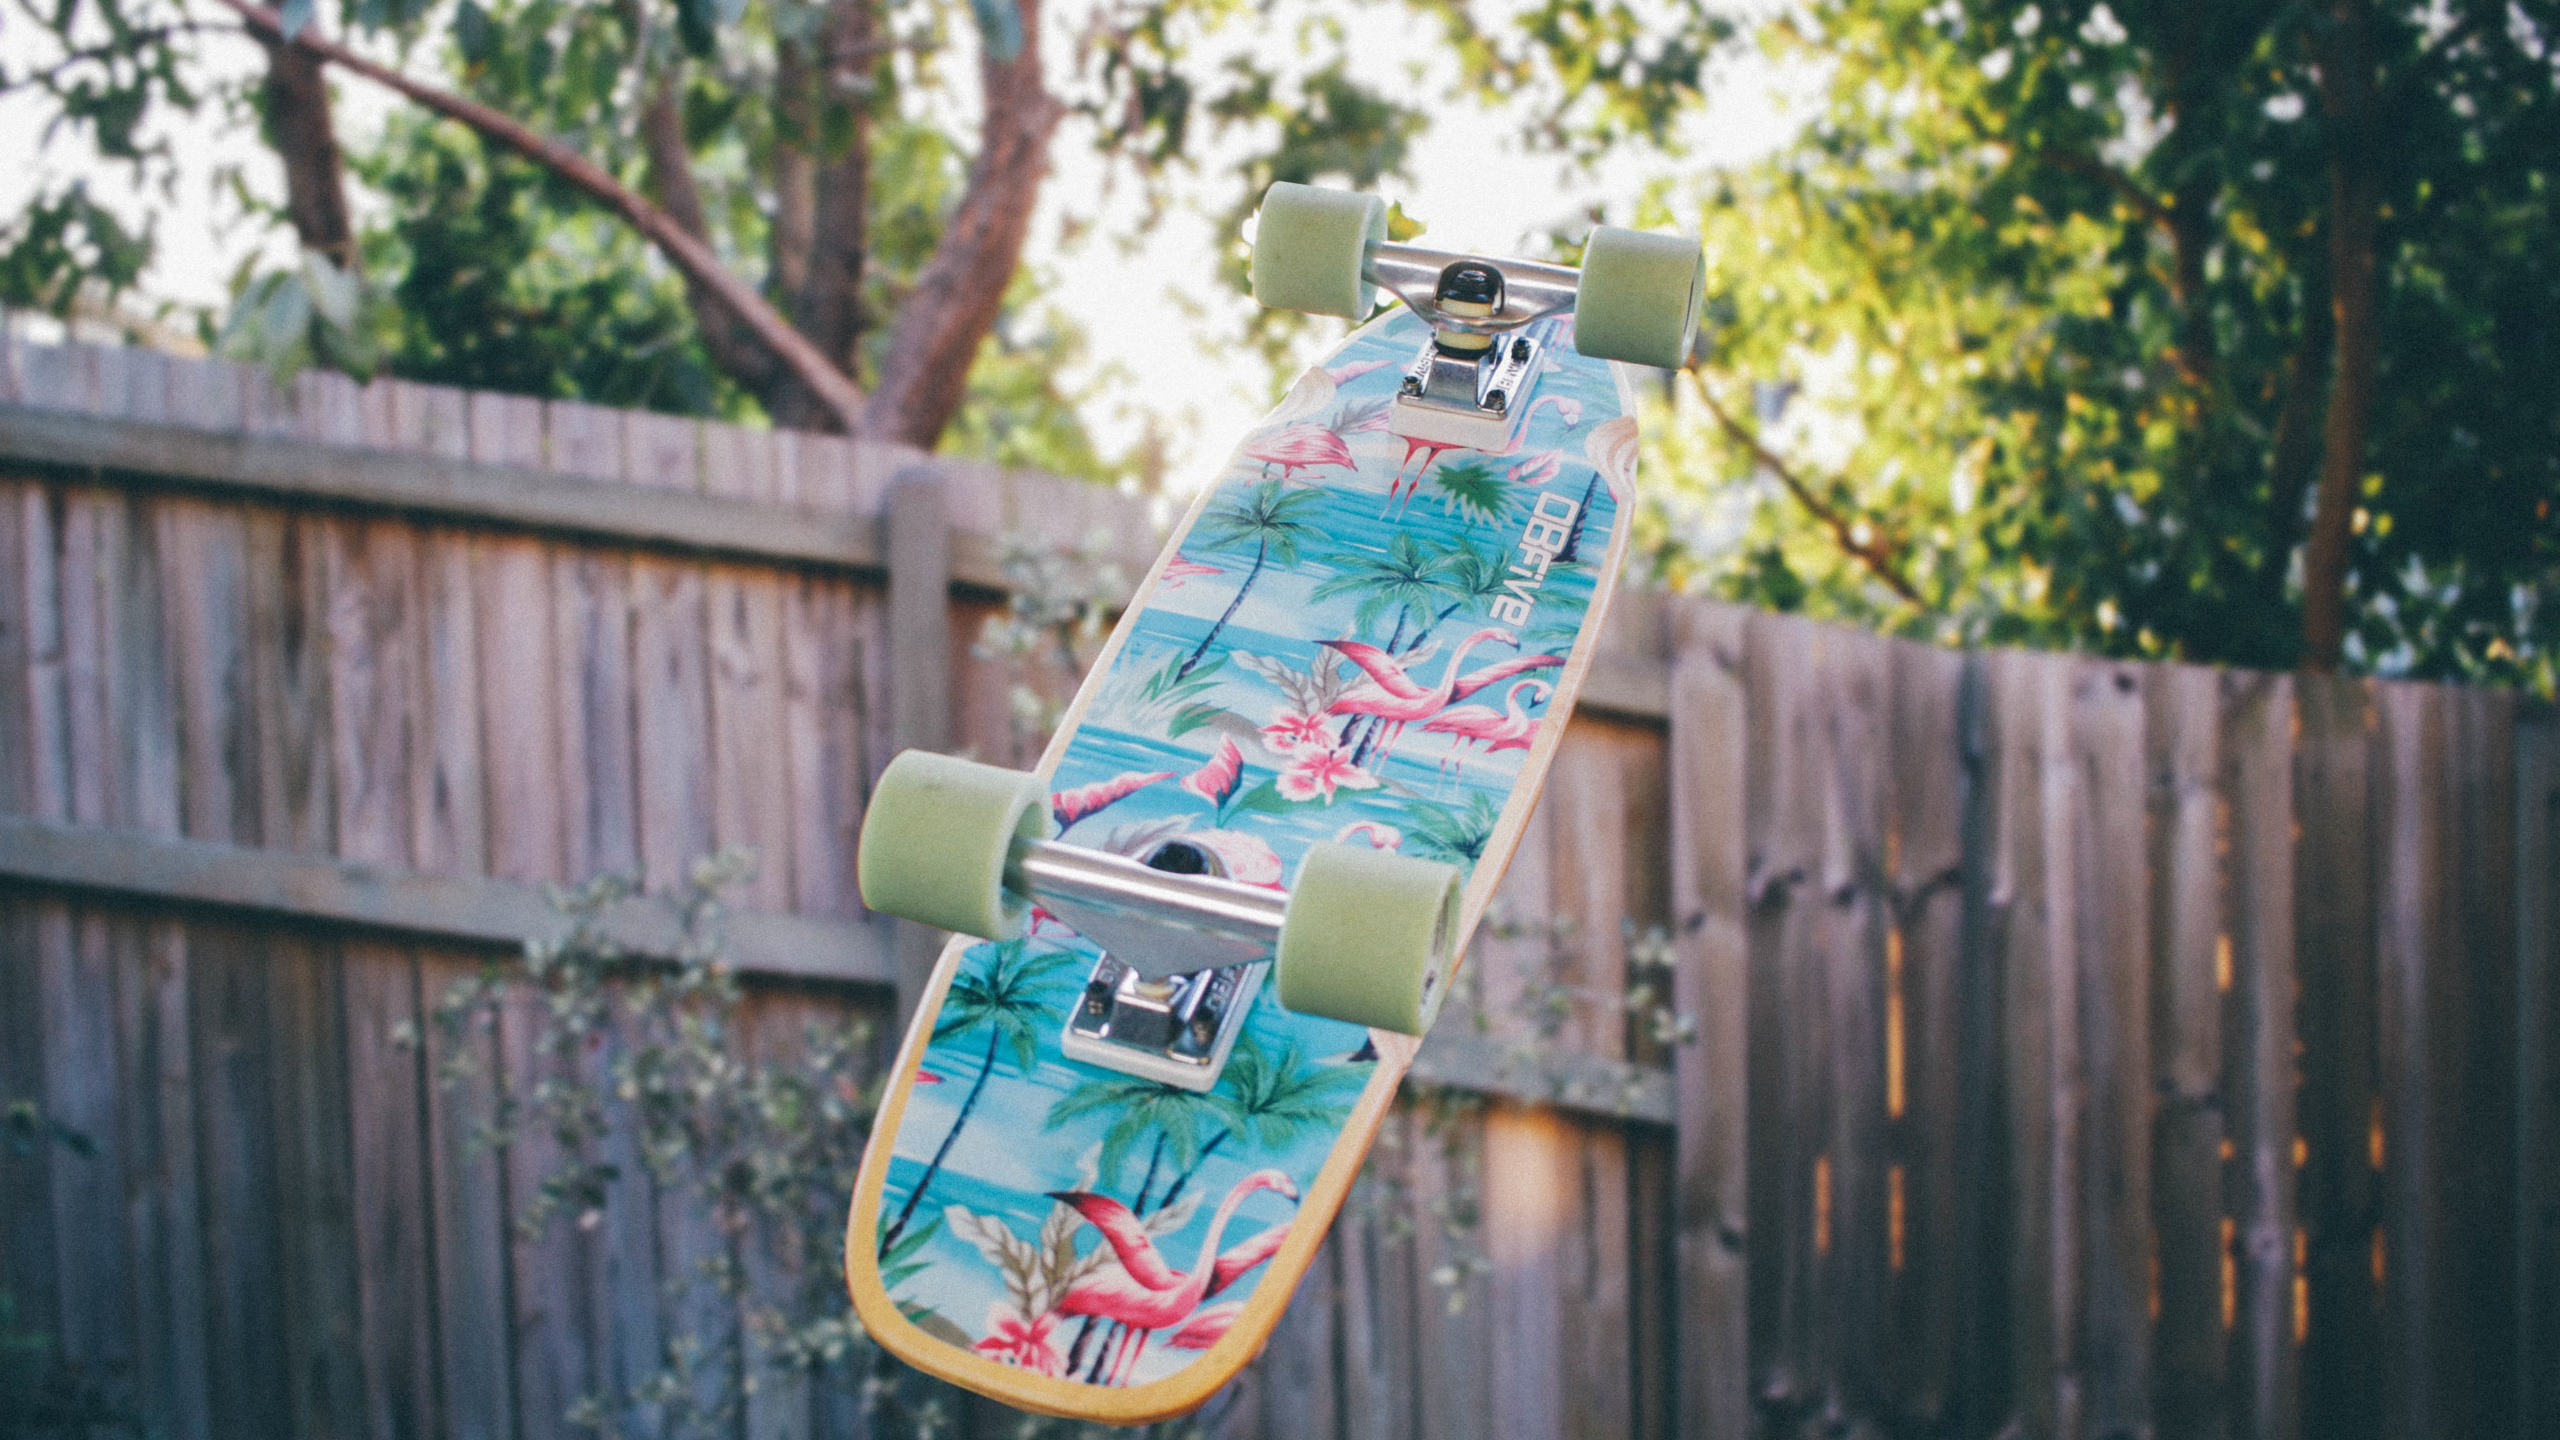 Green and Black Skateboard on Brown Wooden Fence During Daytime. Wallpaper in 2560x1440 Resolution